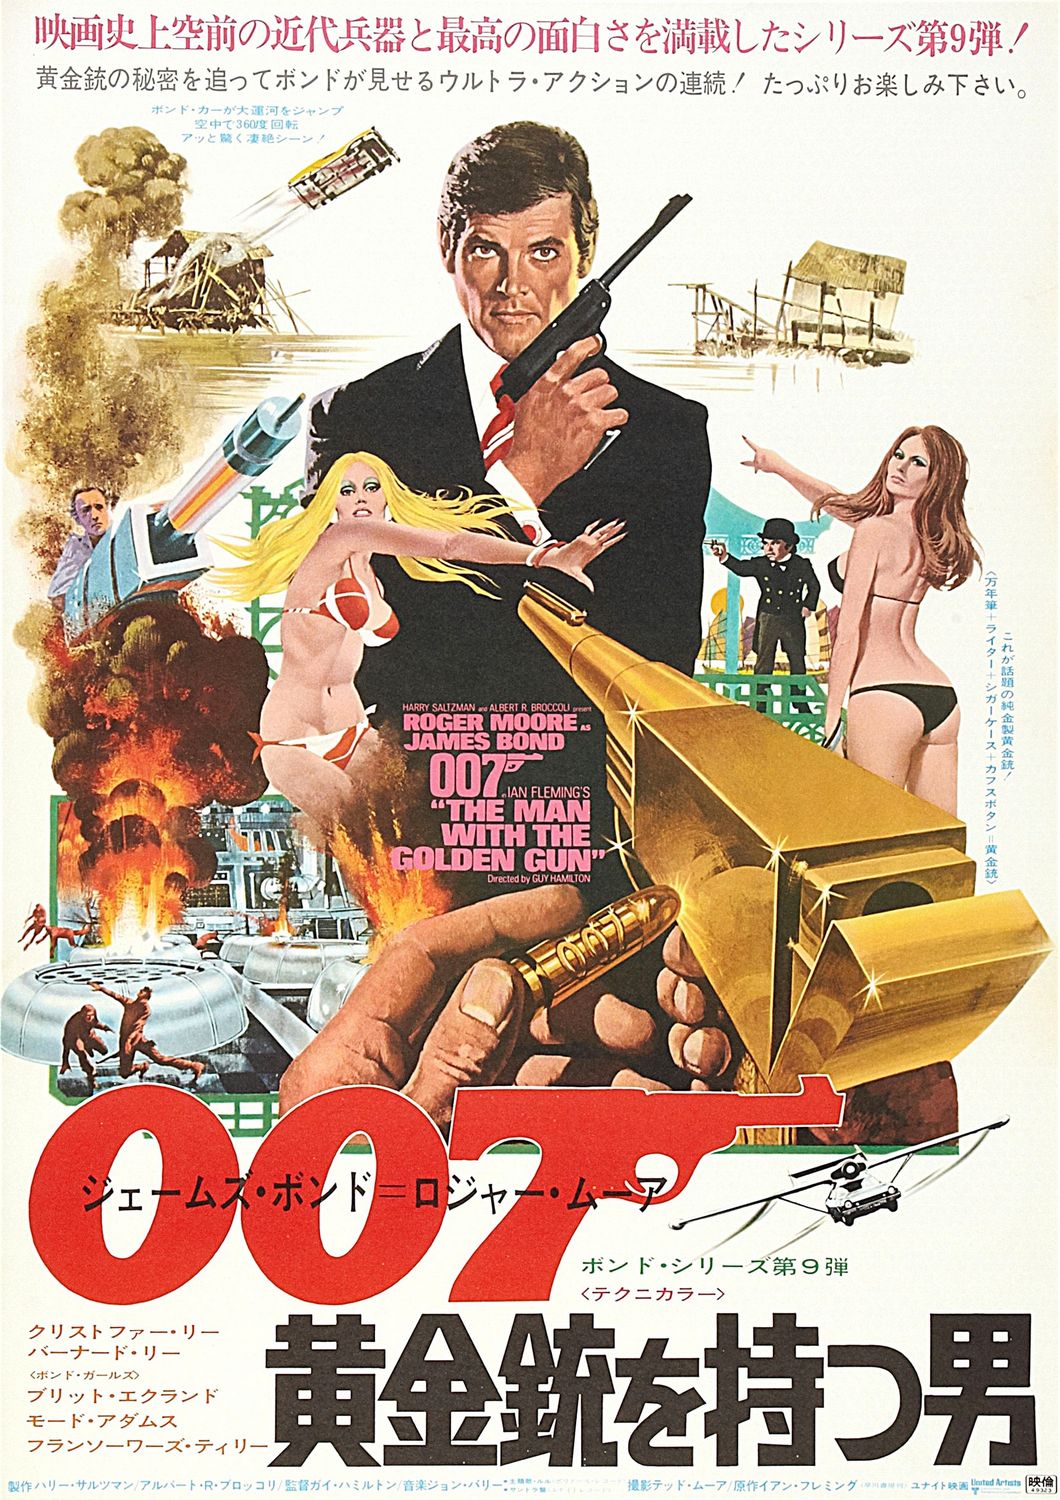 Extra Large Movie Poster Image for The Man With the Golden Gun (#4 of 4)